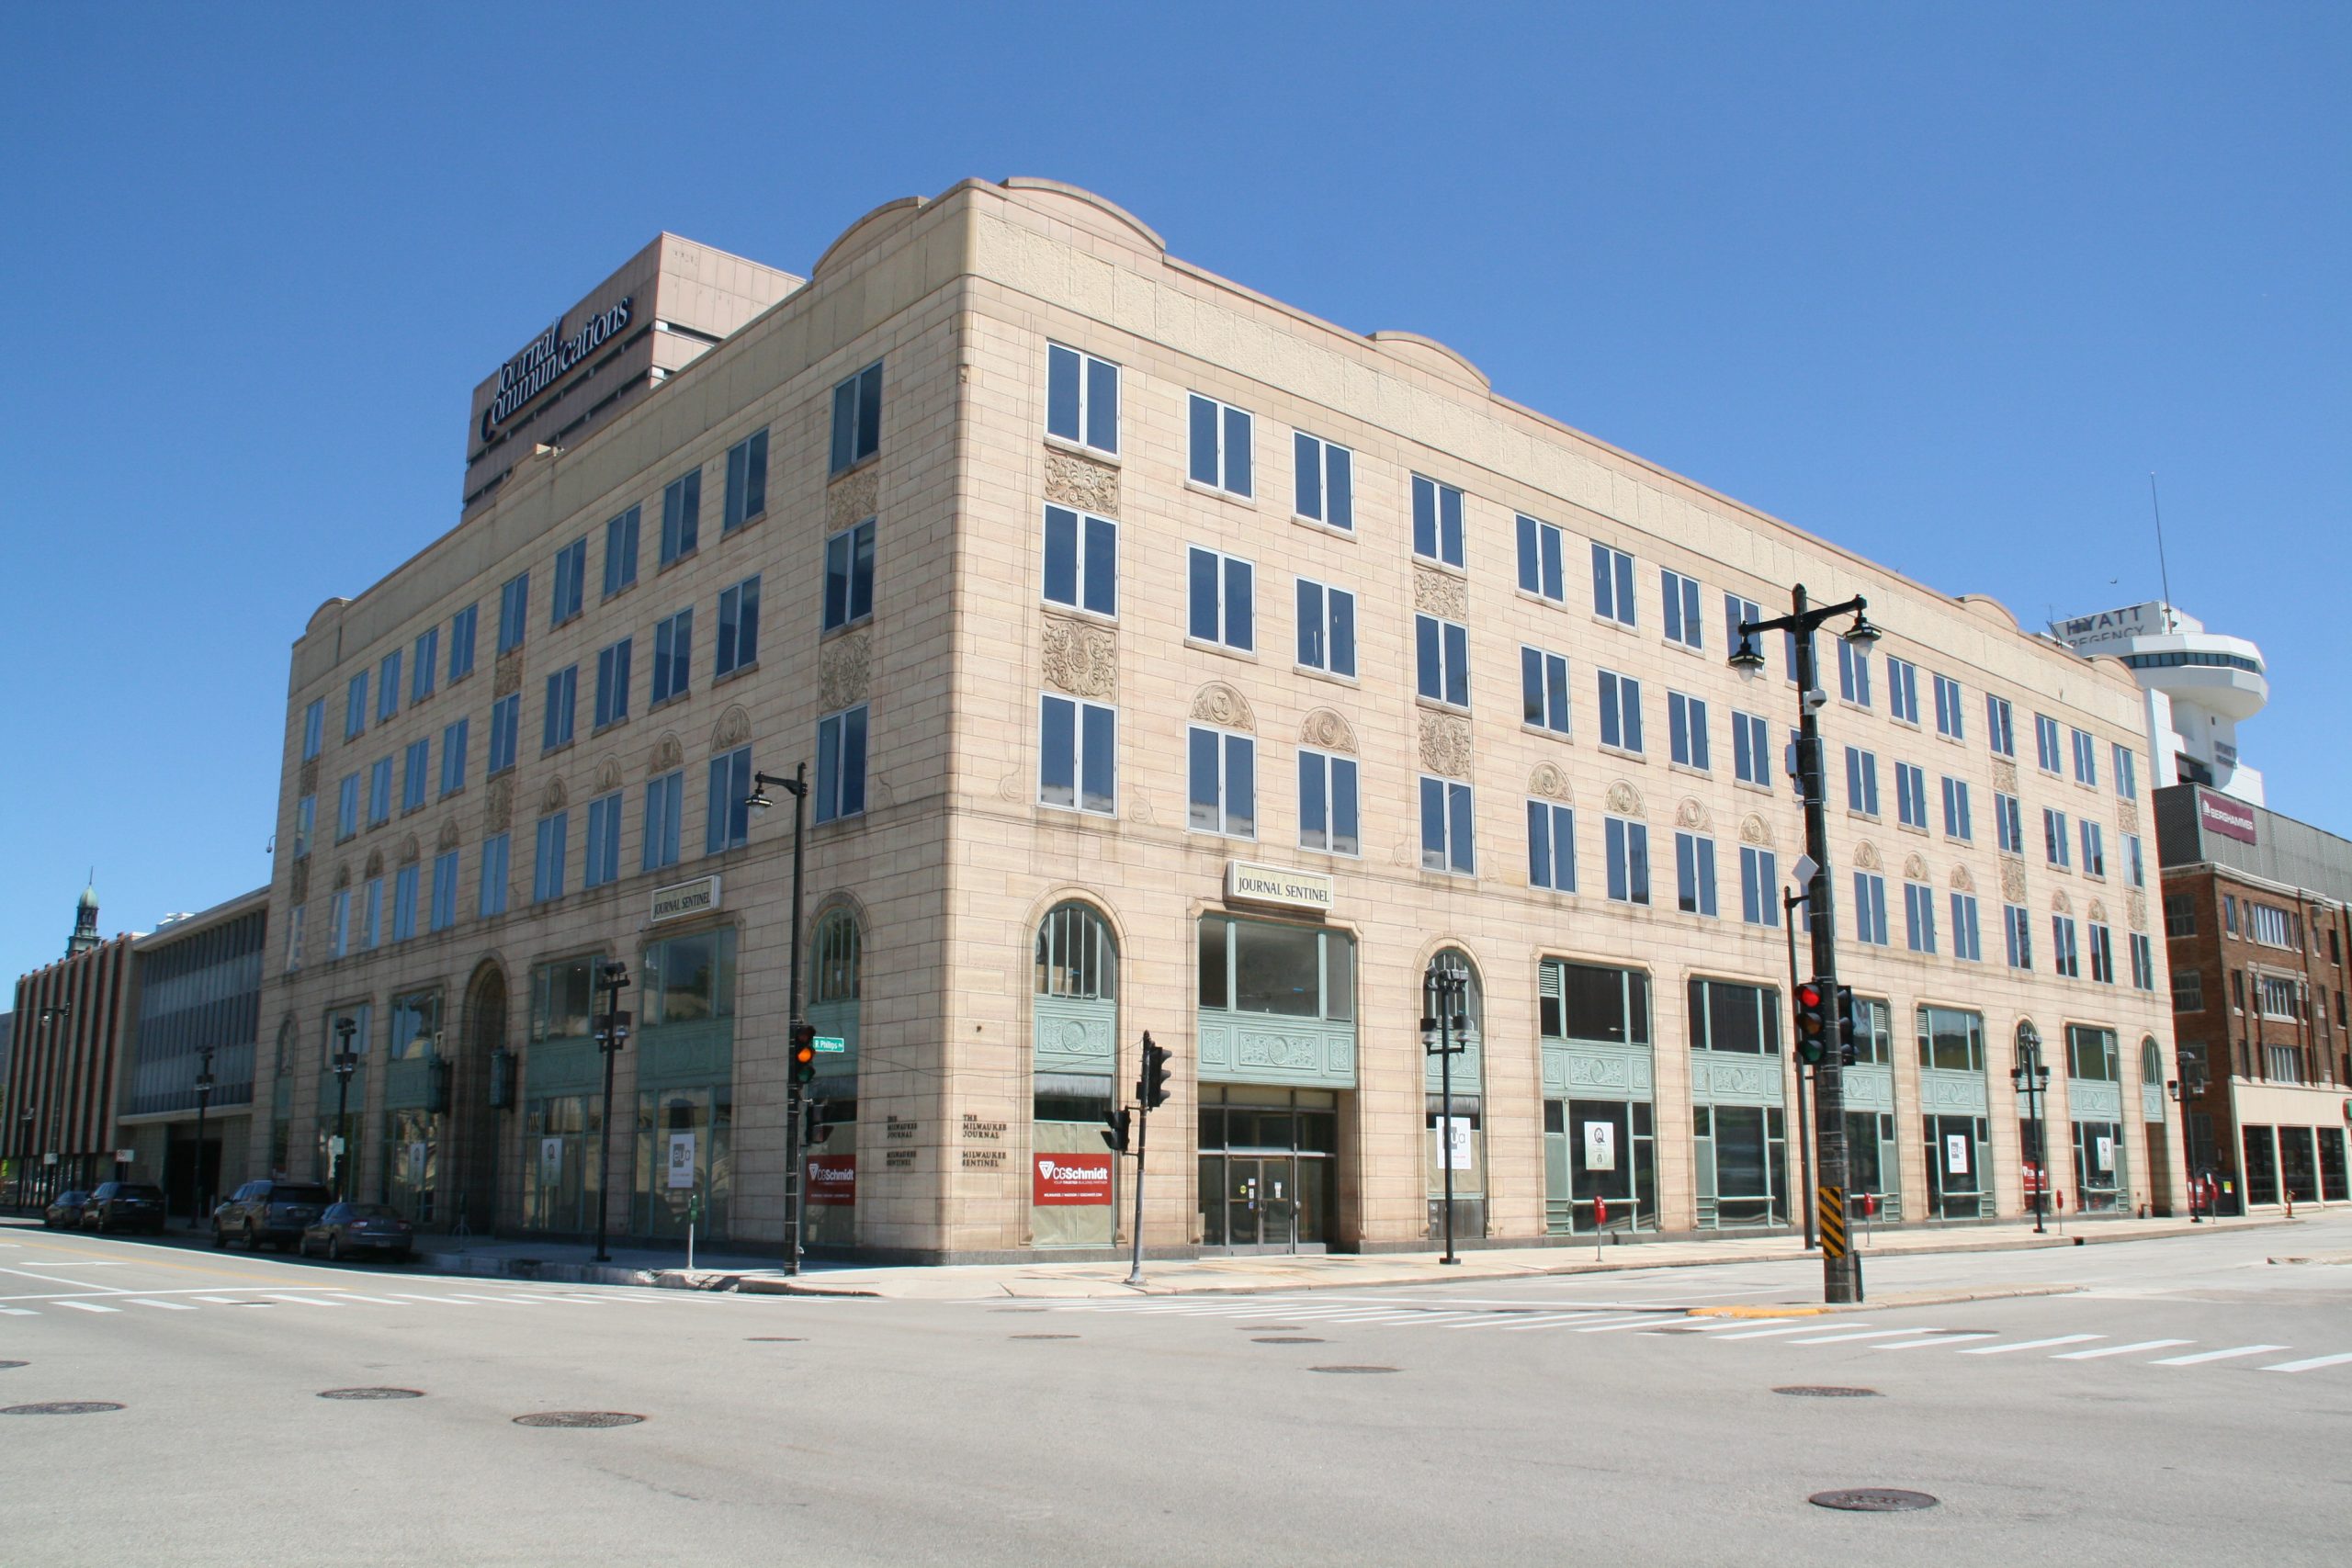 Tenor High School Journal Square Campus at former Journal Sentinel